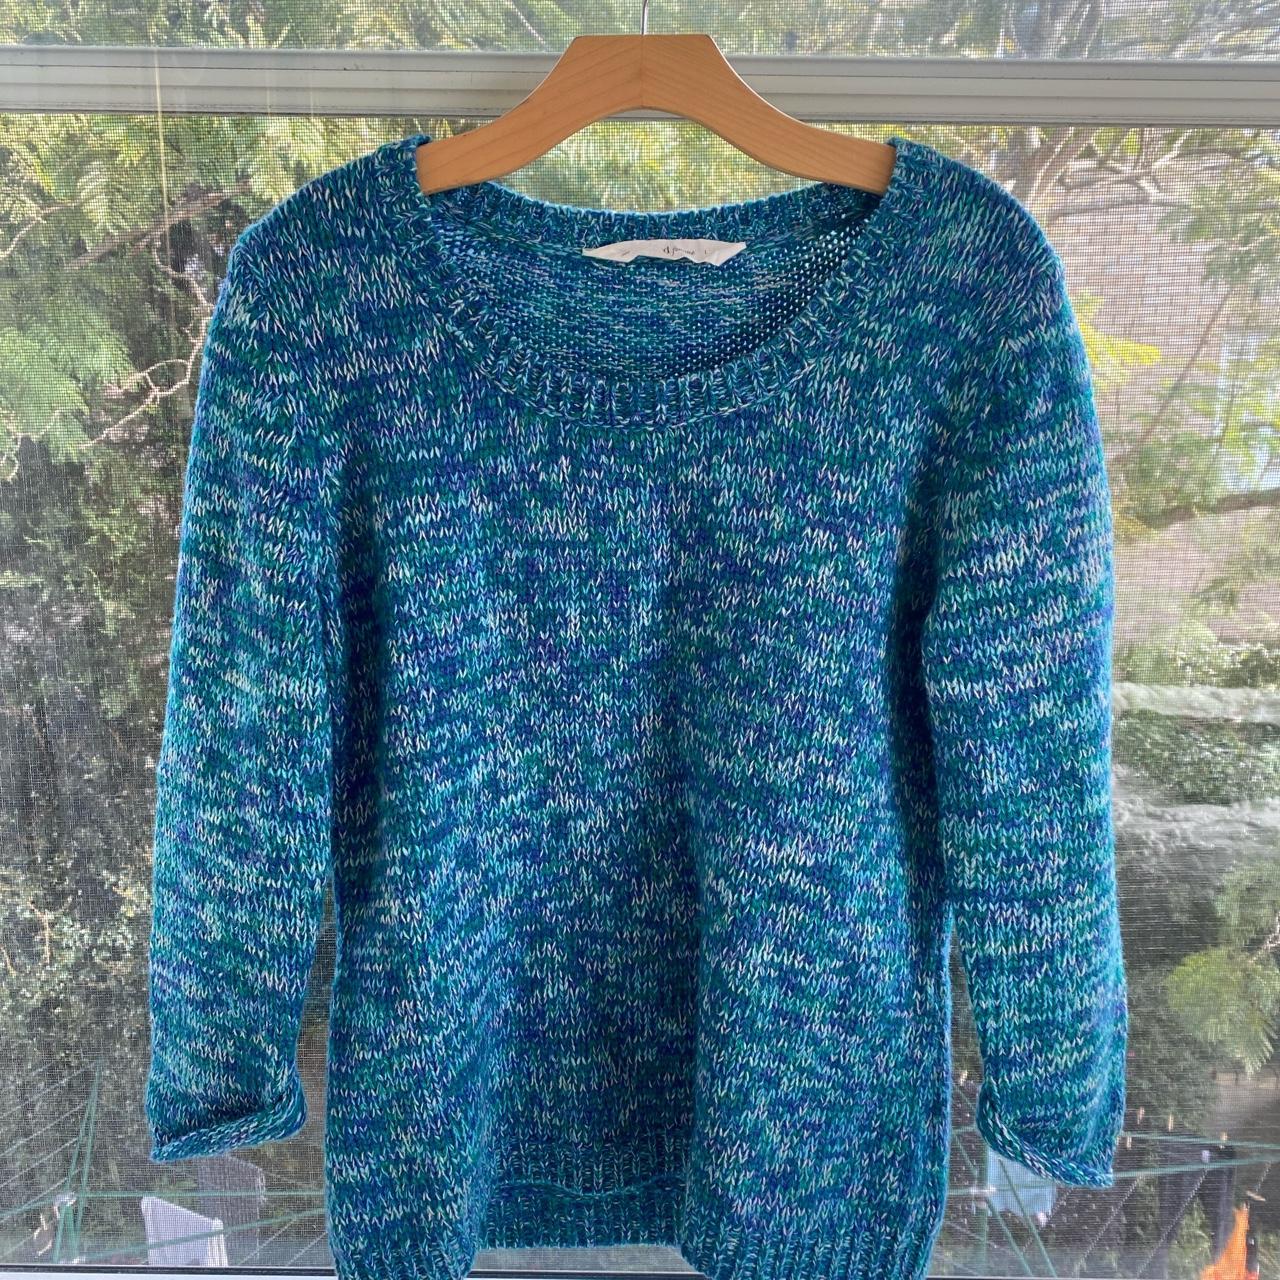 SEED woollen jumper. Great colours and loose it. I... - Depop